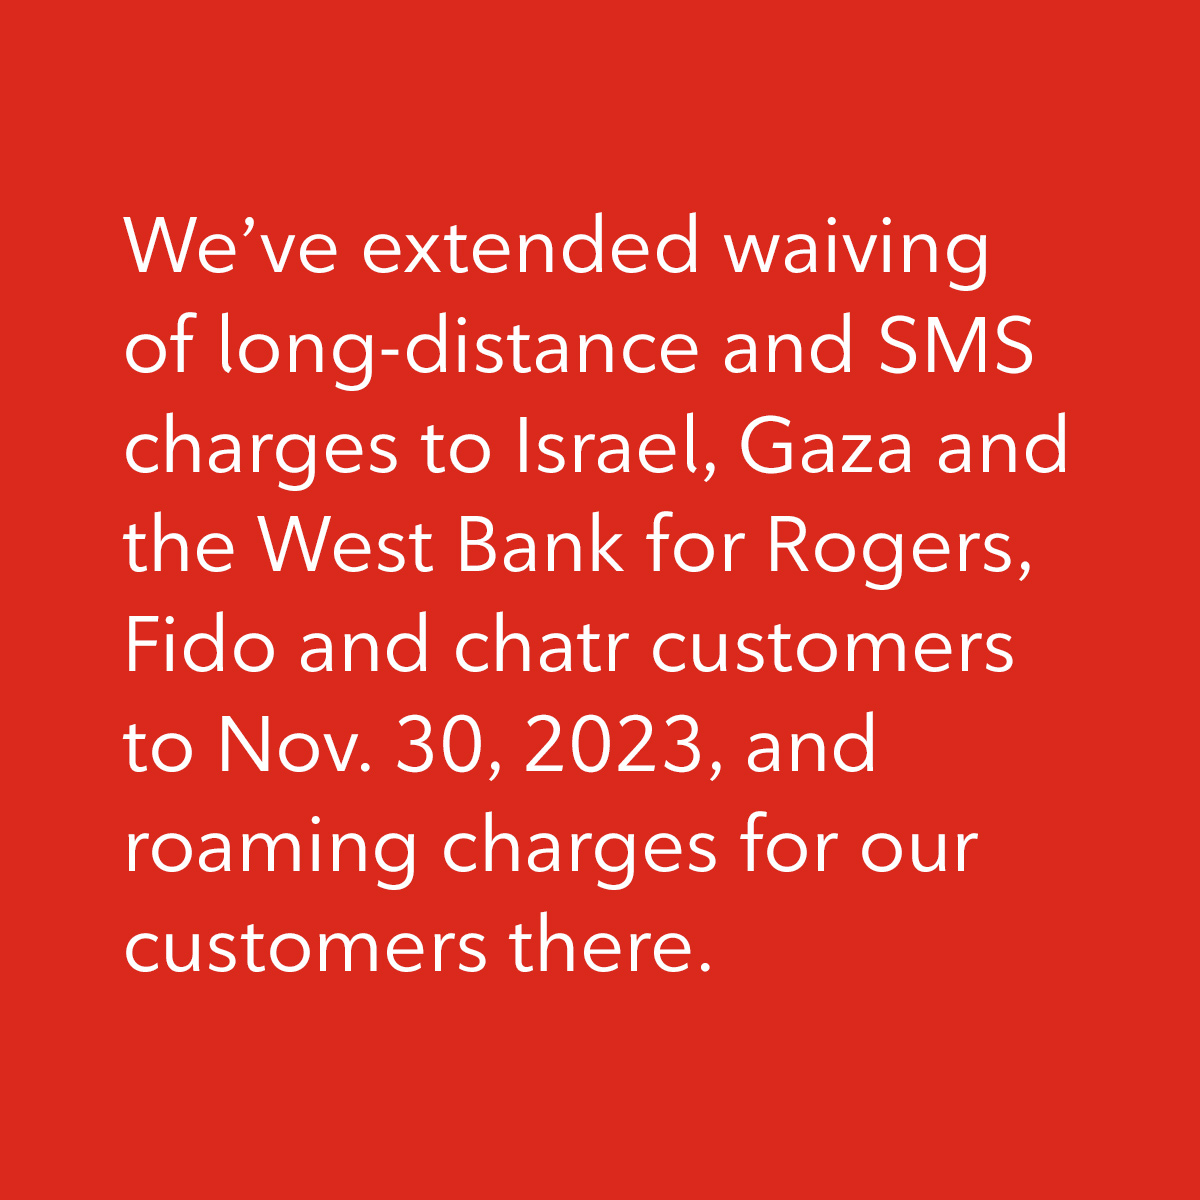 We’ve extended waiving of long-distance and SMS charges to Israel, Gaza and the West Bank for Rogers, Fido and chatr customers to Nov. 30, 2023, and roaming charges for our customers there.